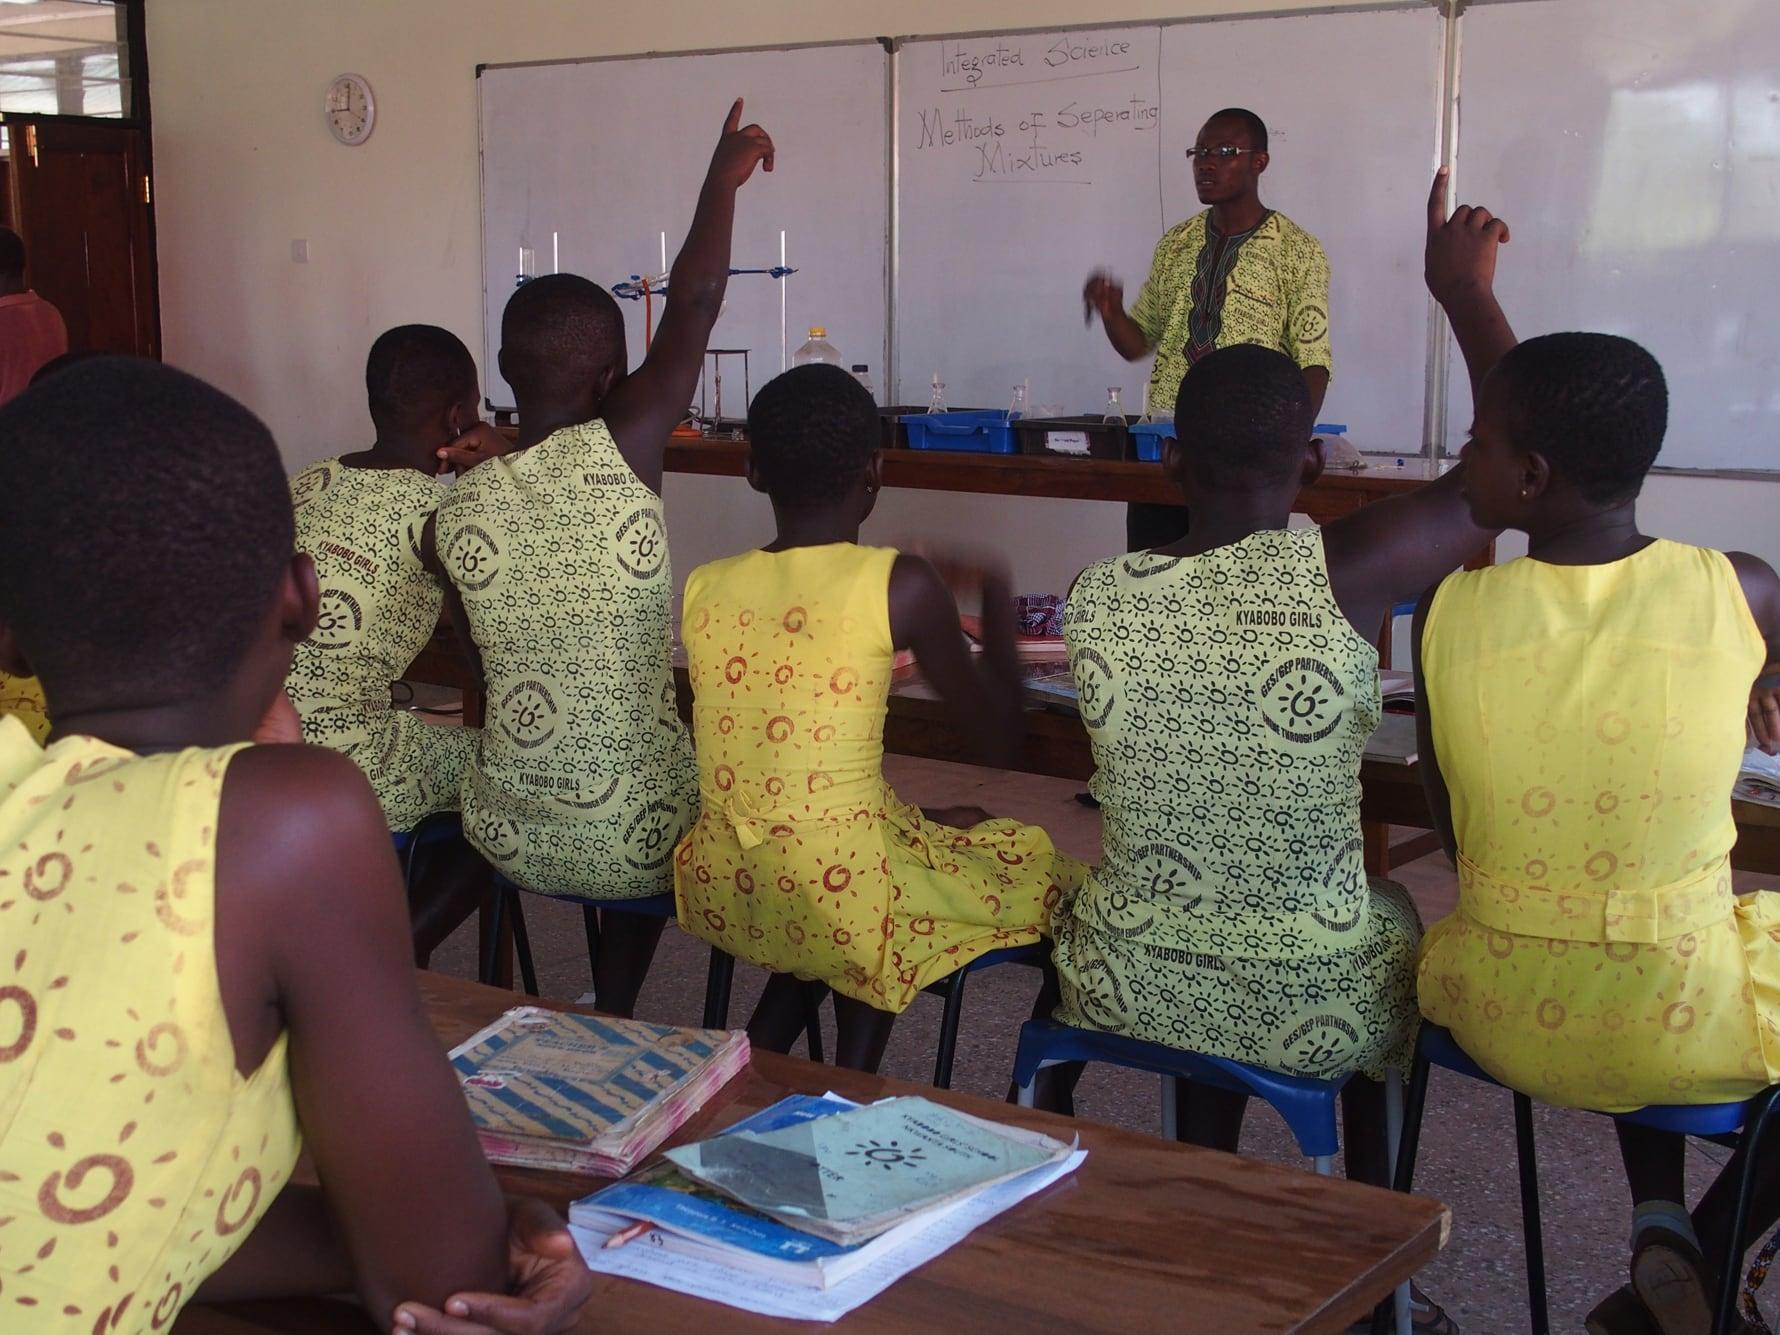 Newsletters from Ghana Education Project